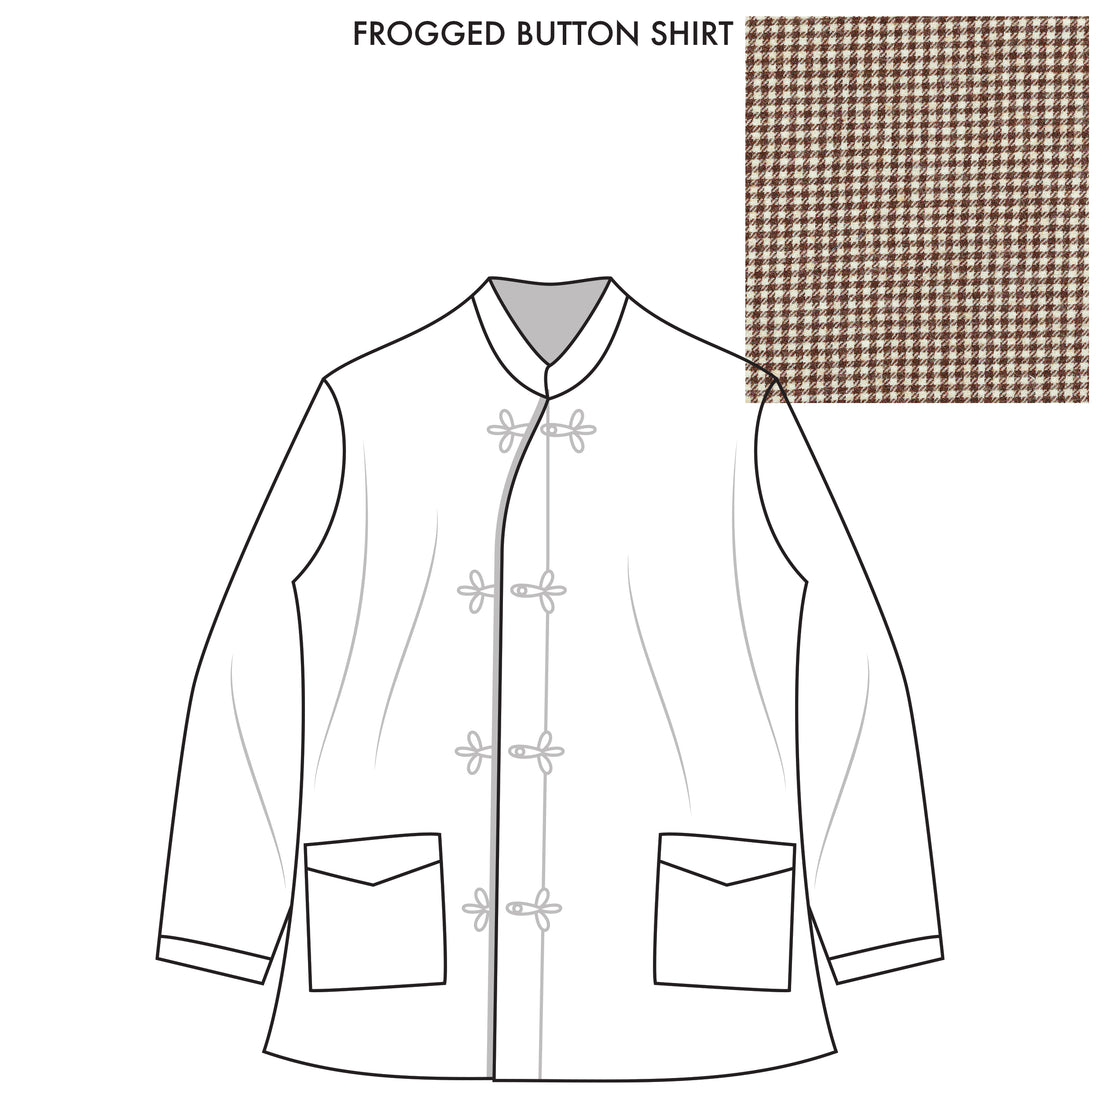 Bryceland’s Frog Button Shirt Made-to-order Brown Puppytooth